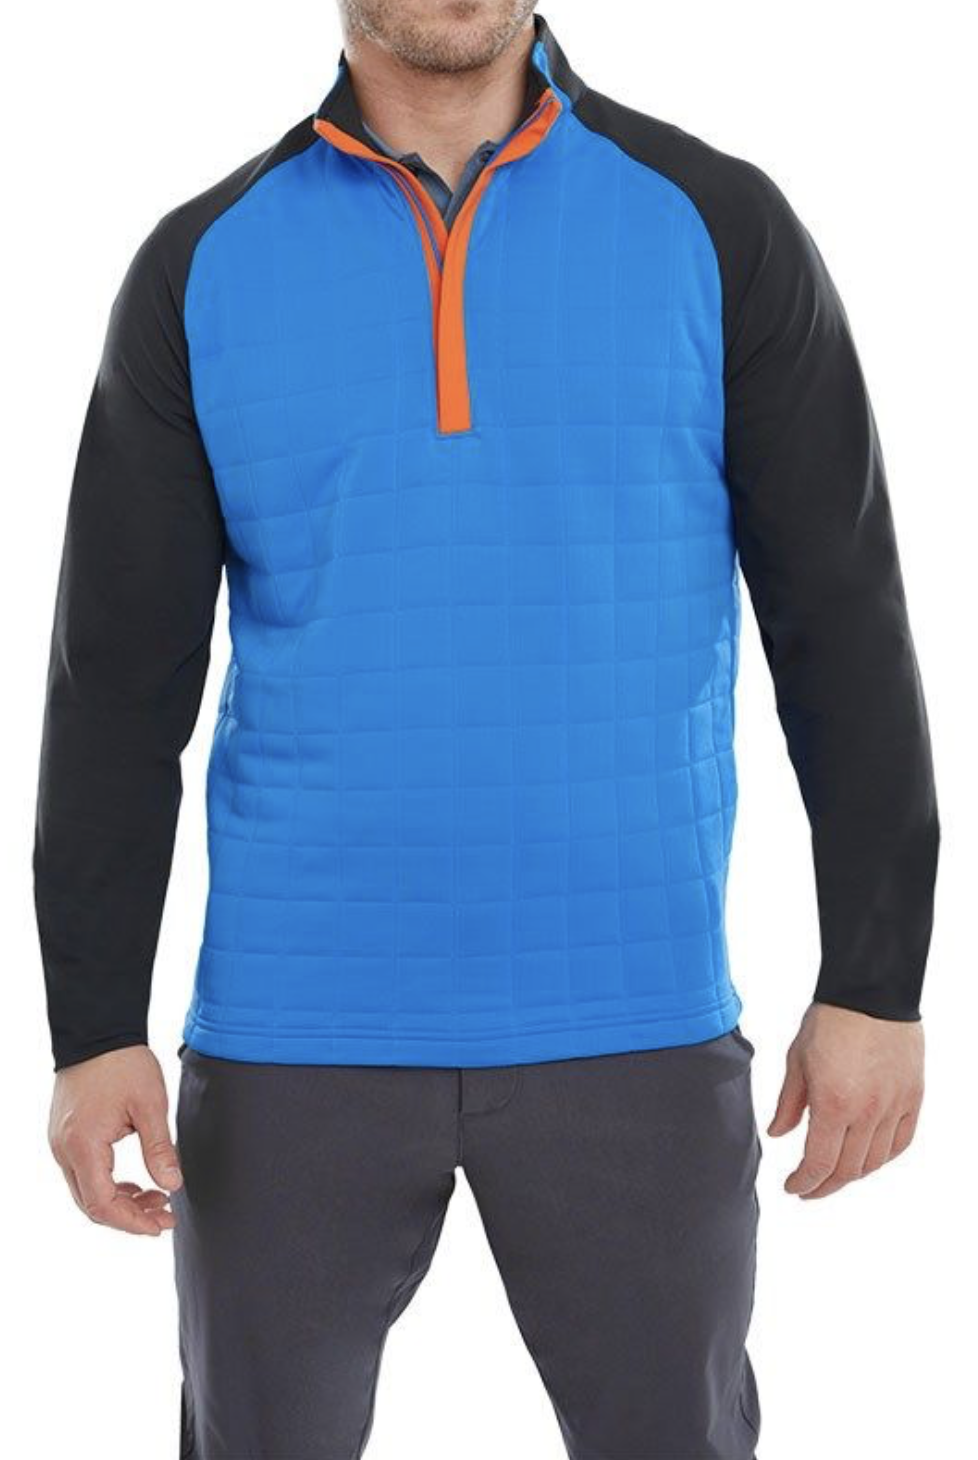 Footjoy | 88836 | Footjoy Quilted Jacquard Chill-Out XP | Sapphire with Black & Orange